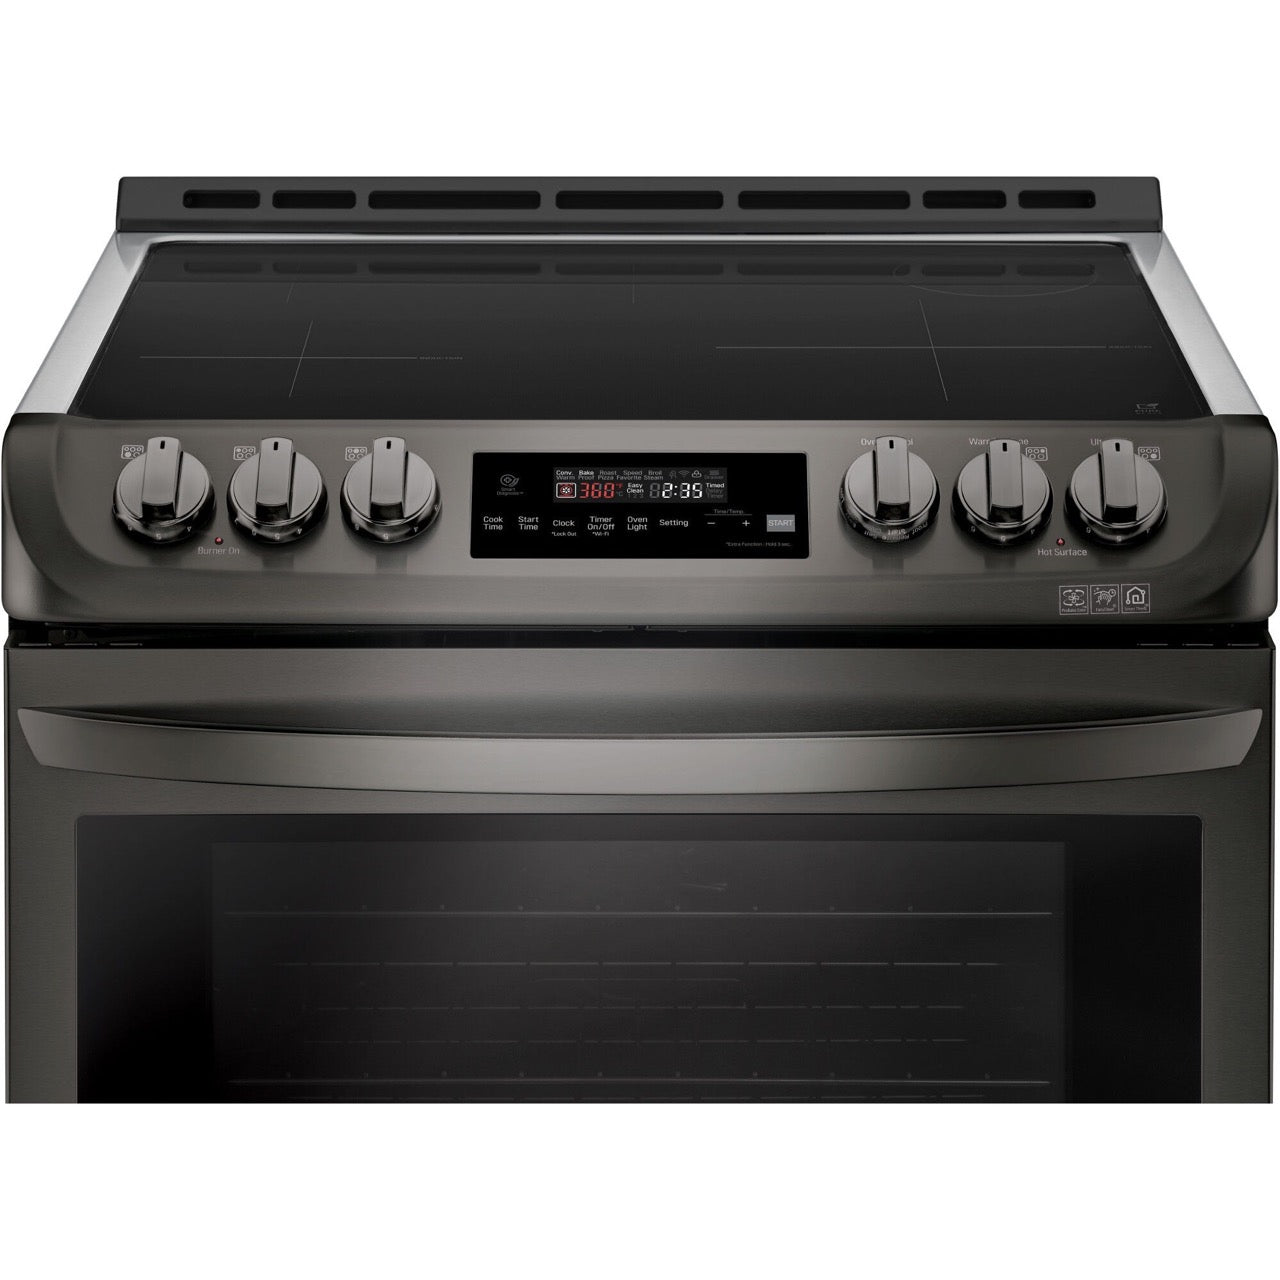 LG Electronics 6.3-Cu. Ft. Slide-In Electric Smart Range with ProBake Convection and Induction, Black Stainless Steel (LSE4616BD)